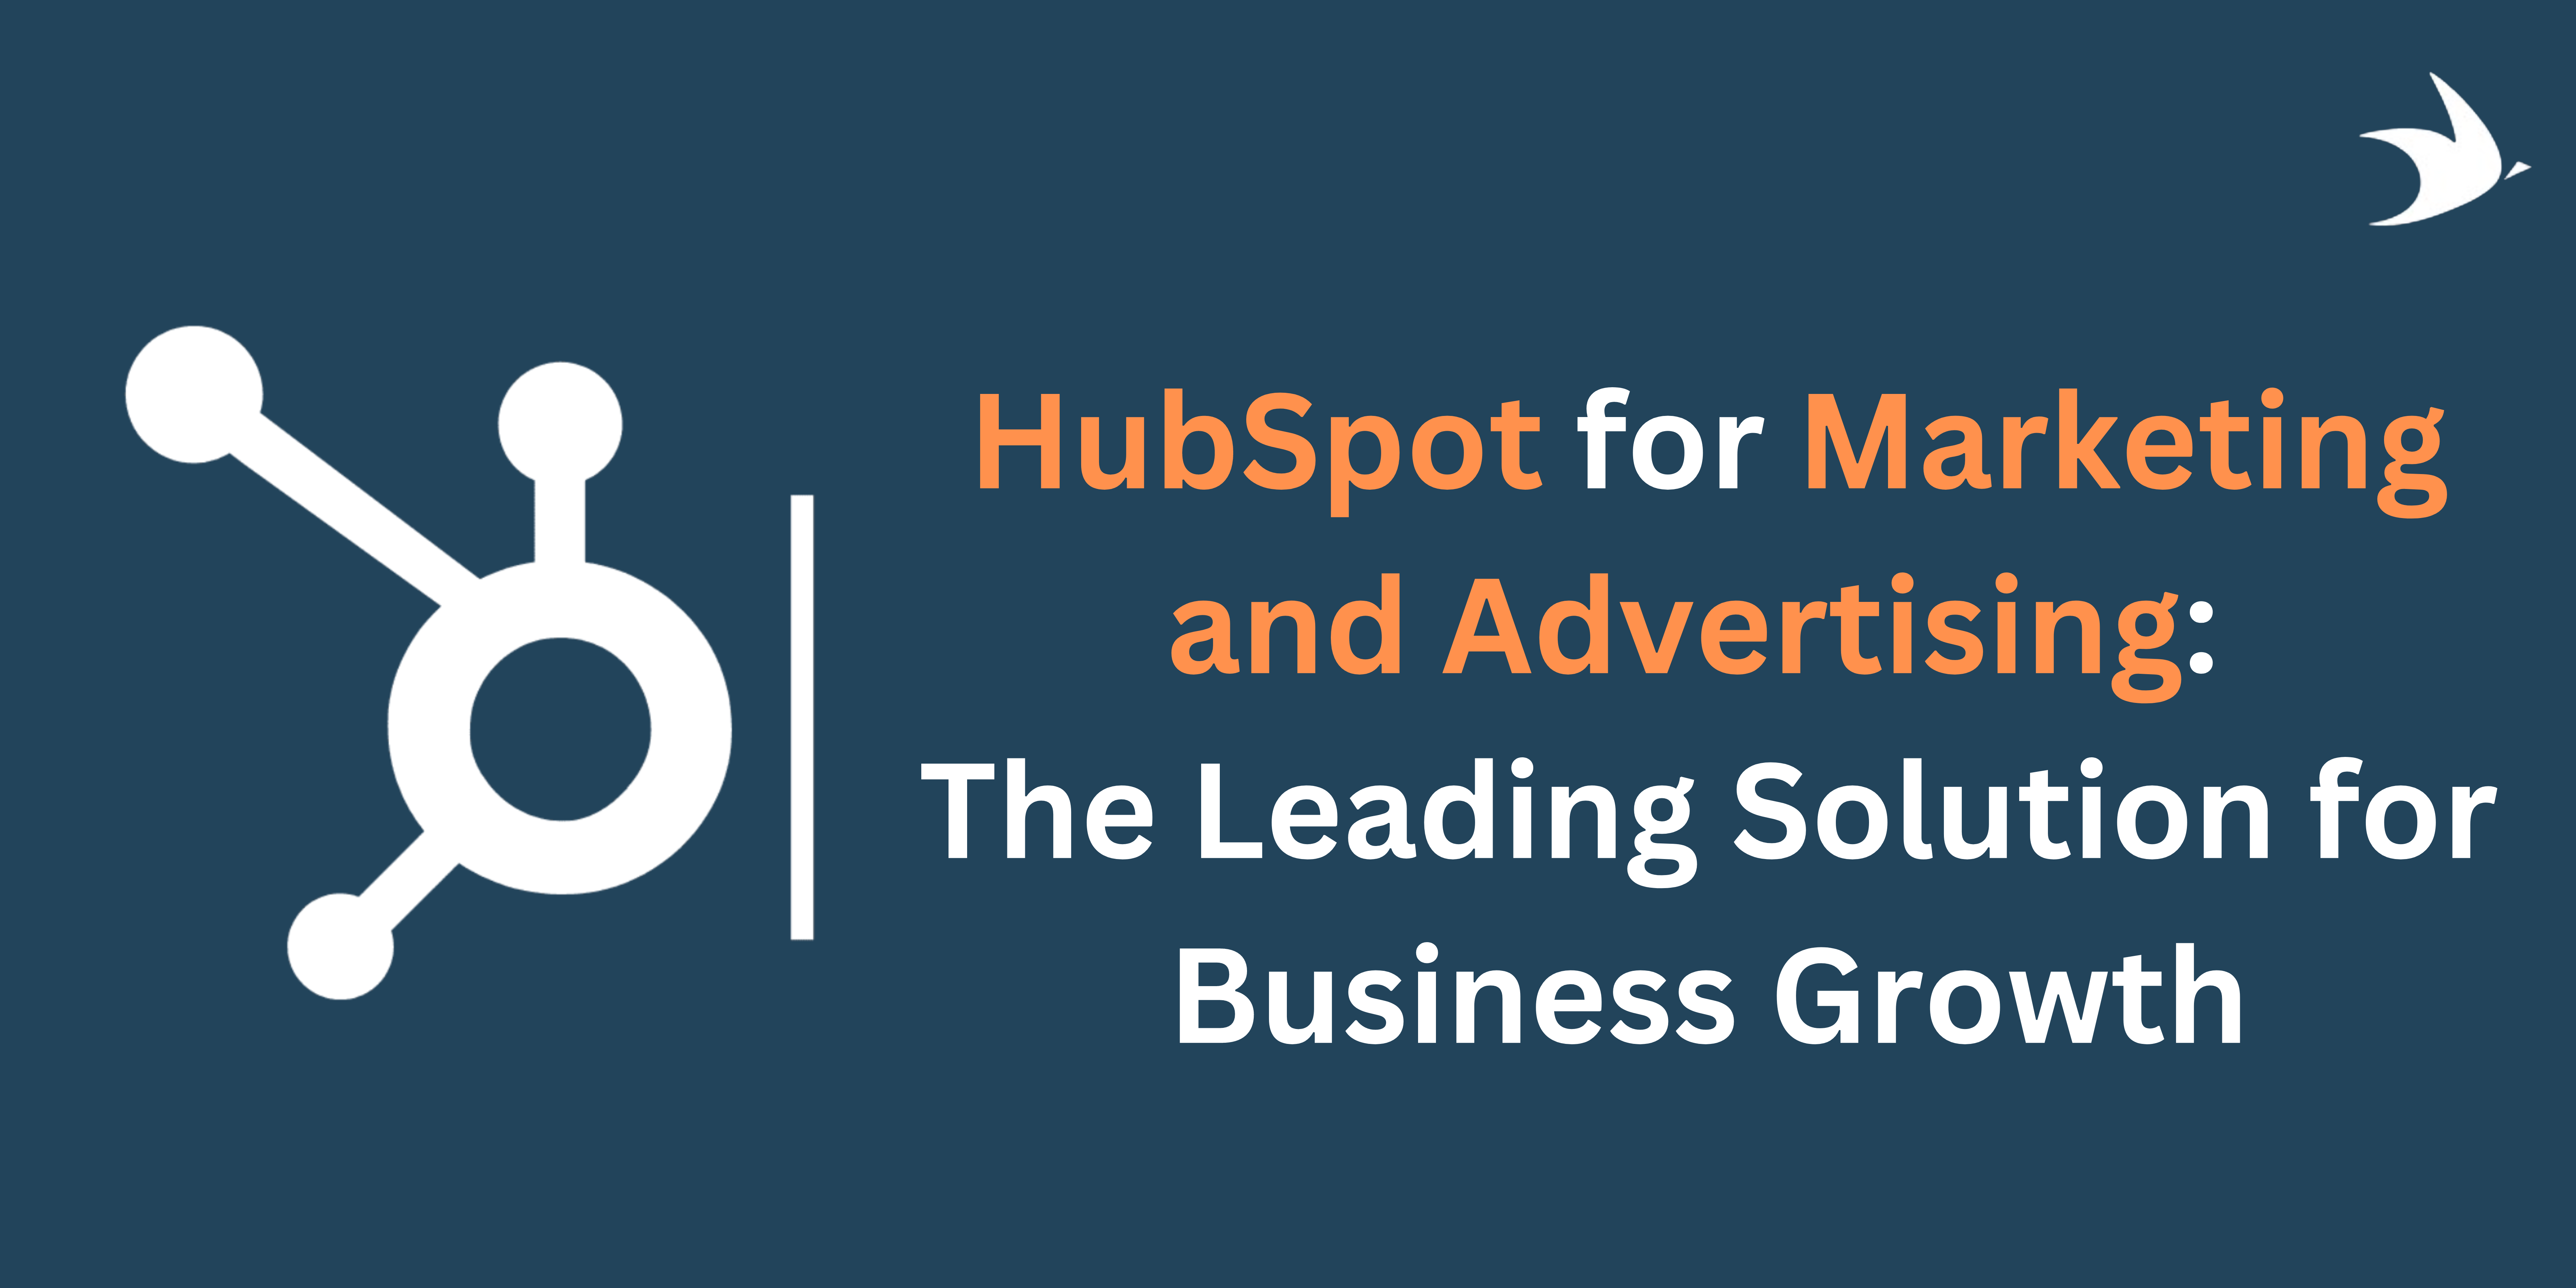 HubSpot for Marketing and Advertising: The Leading Solution for Business Growth